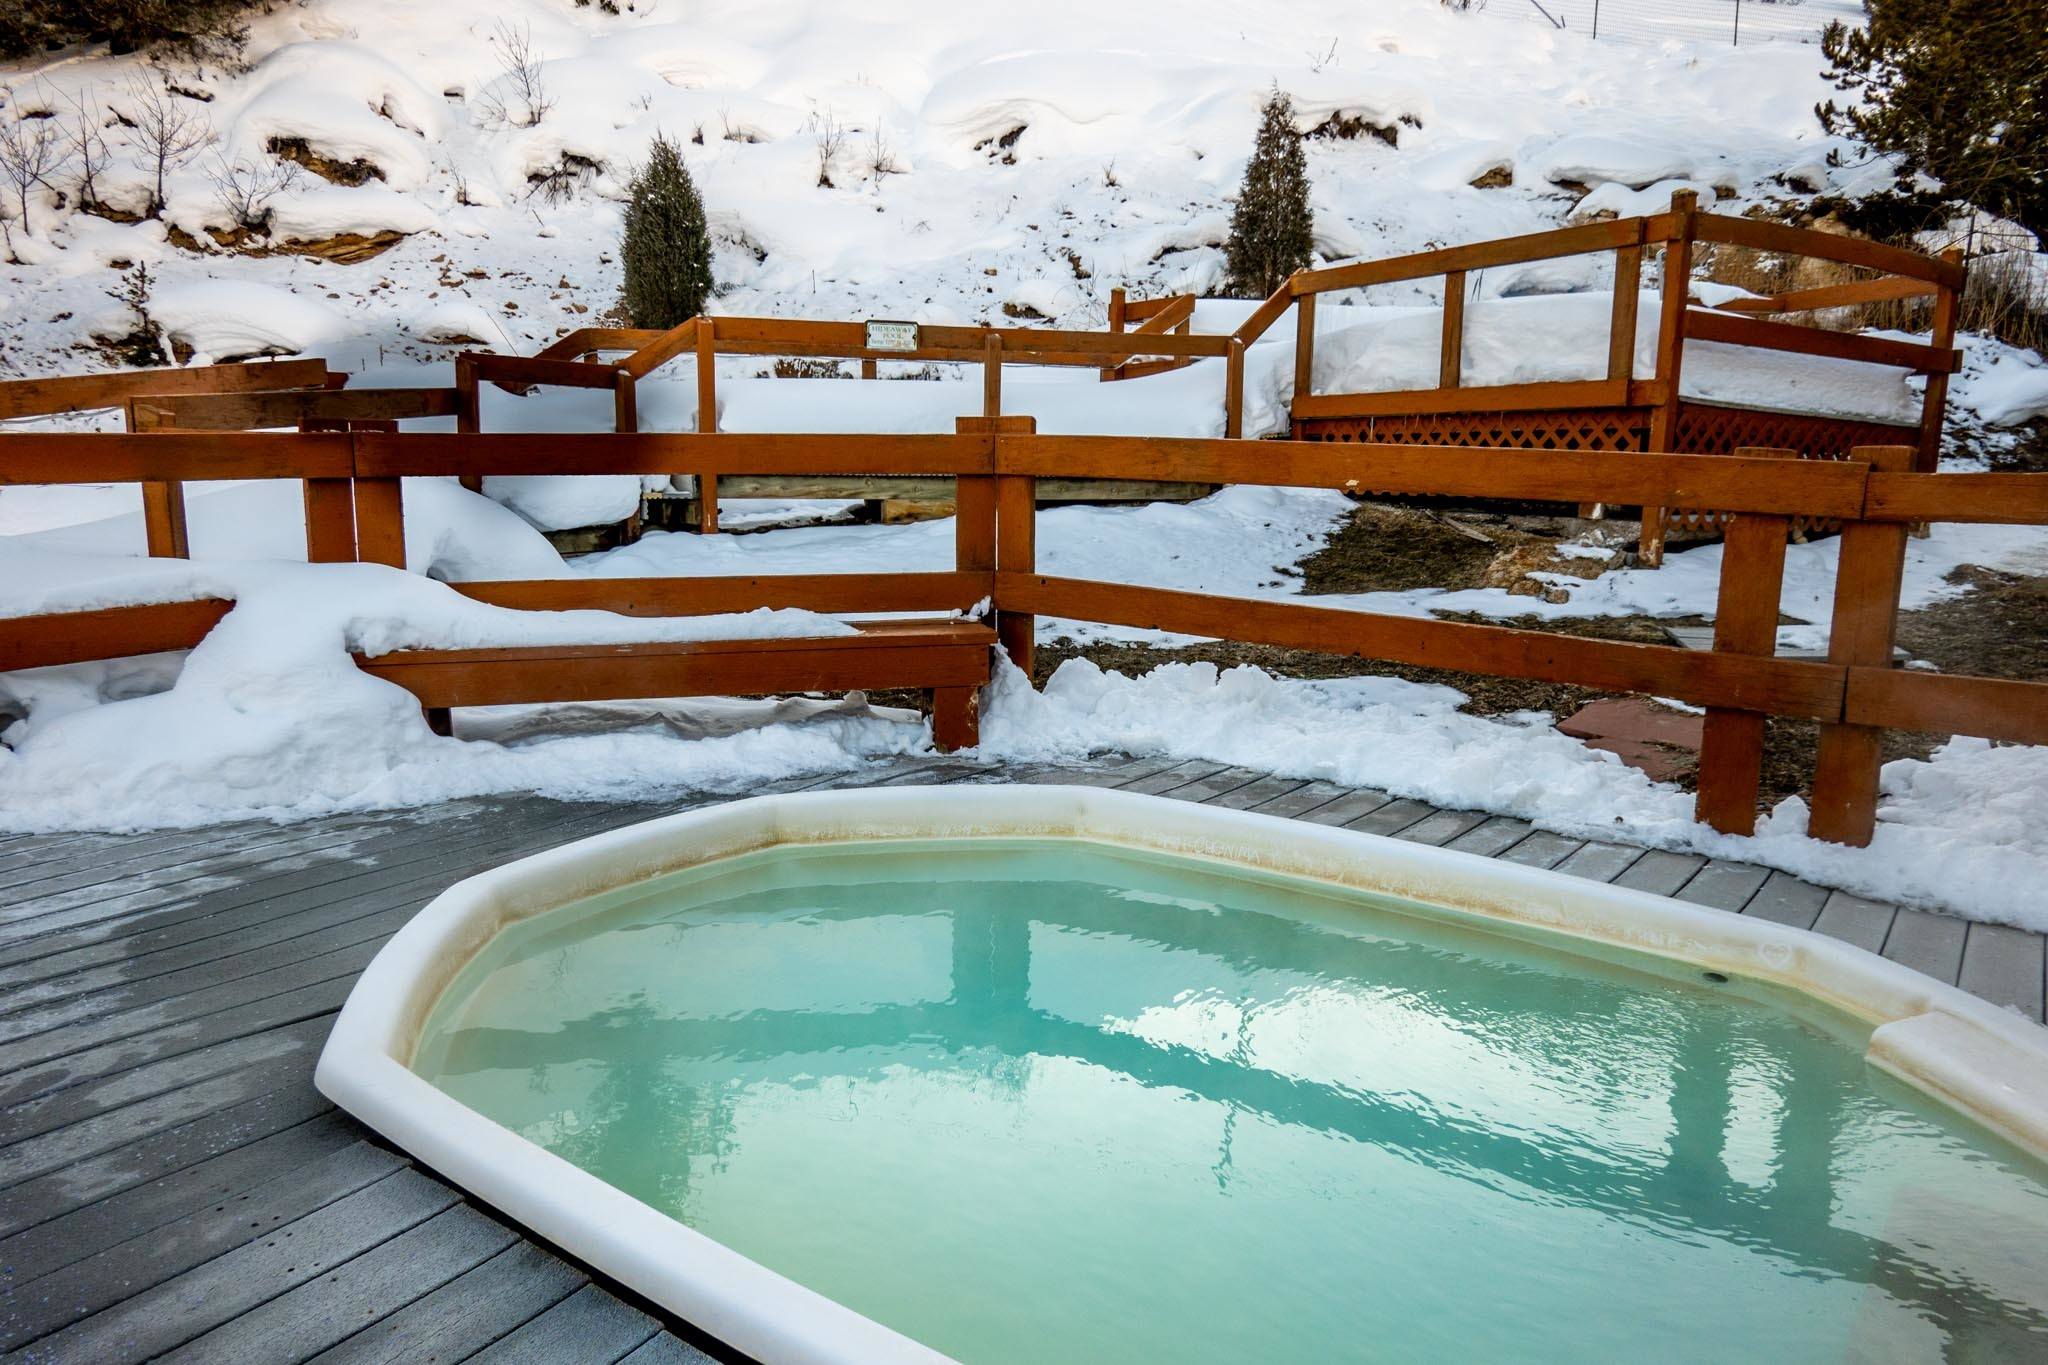 A pool at the Hot Sulphur Springs in winter with snow